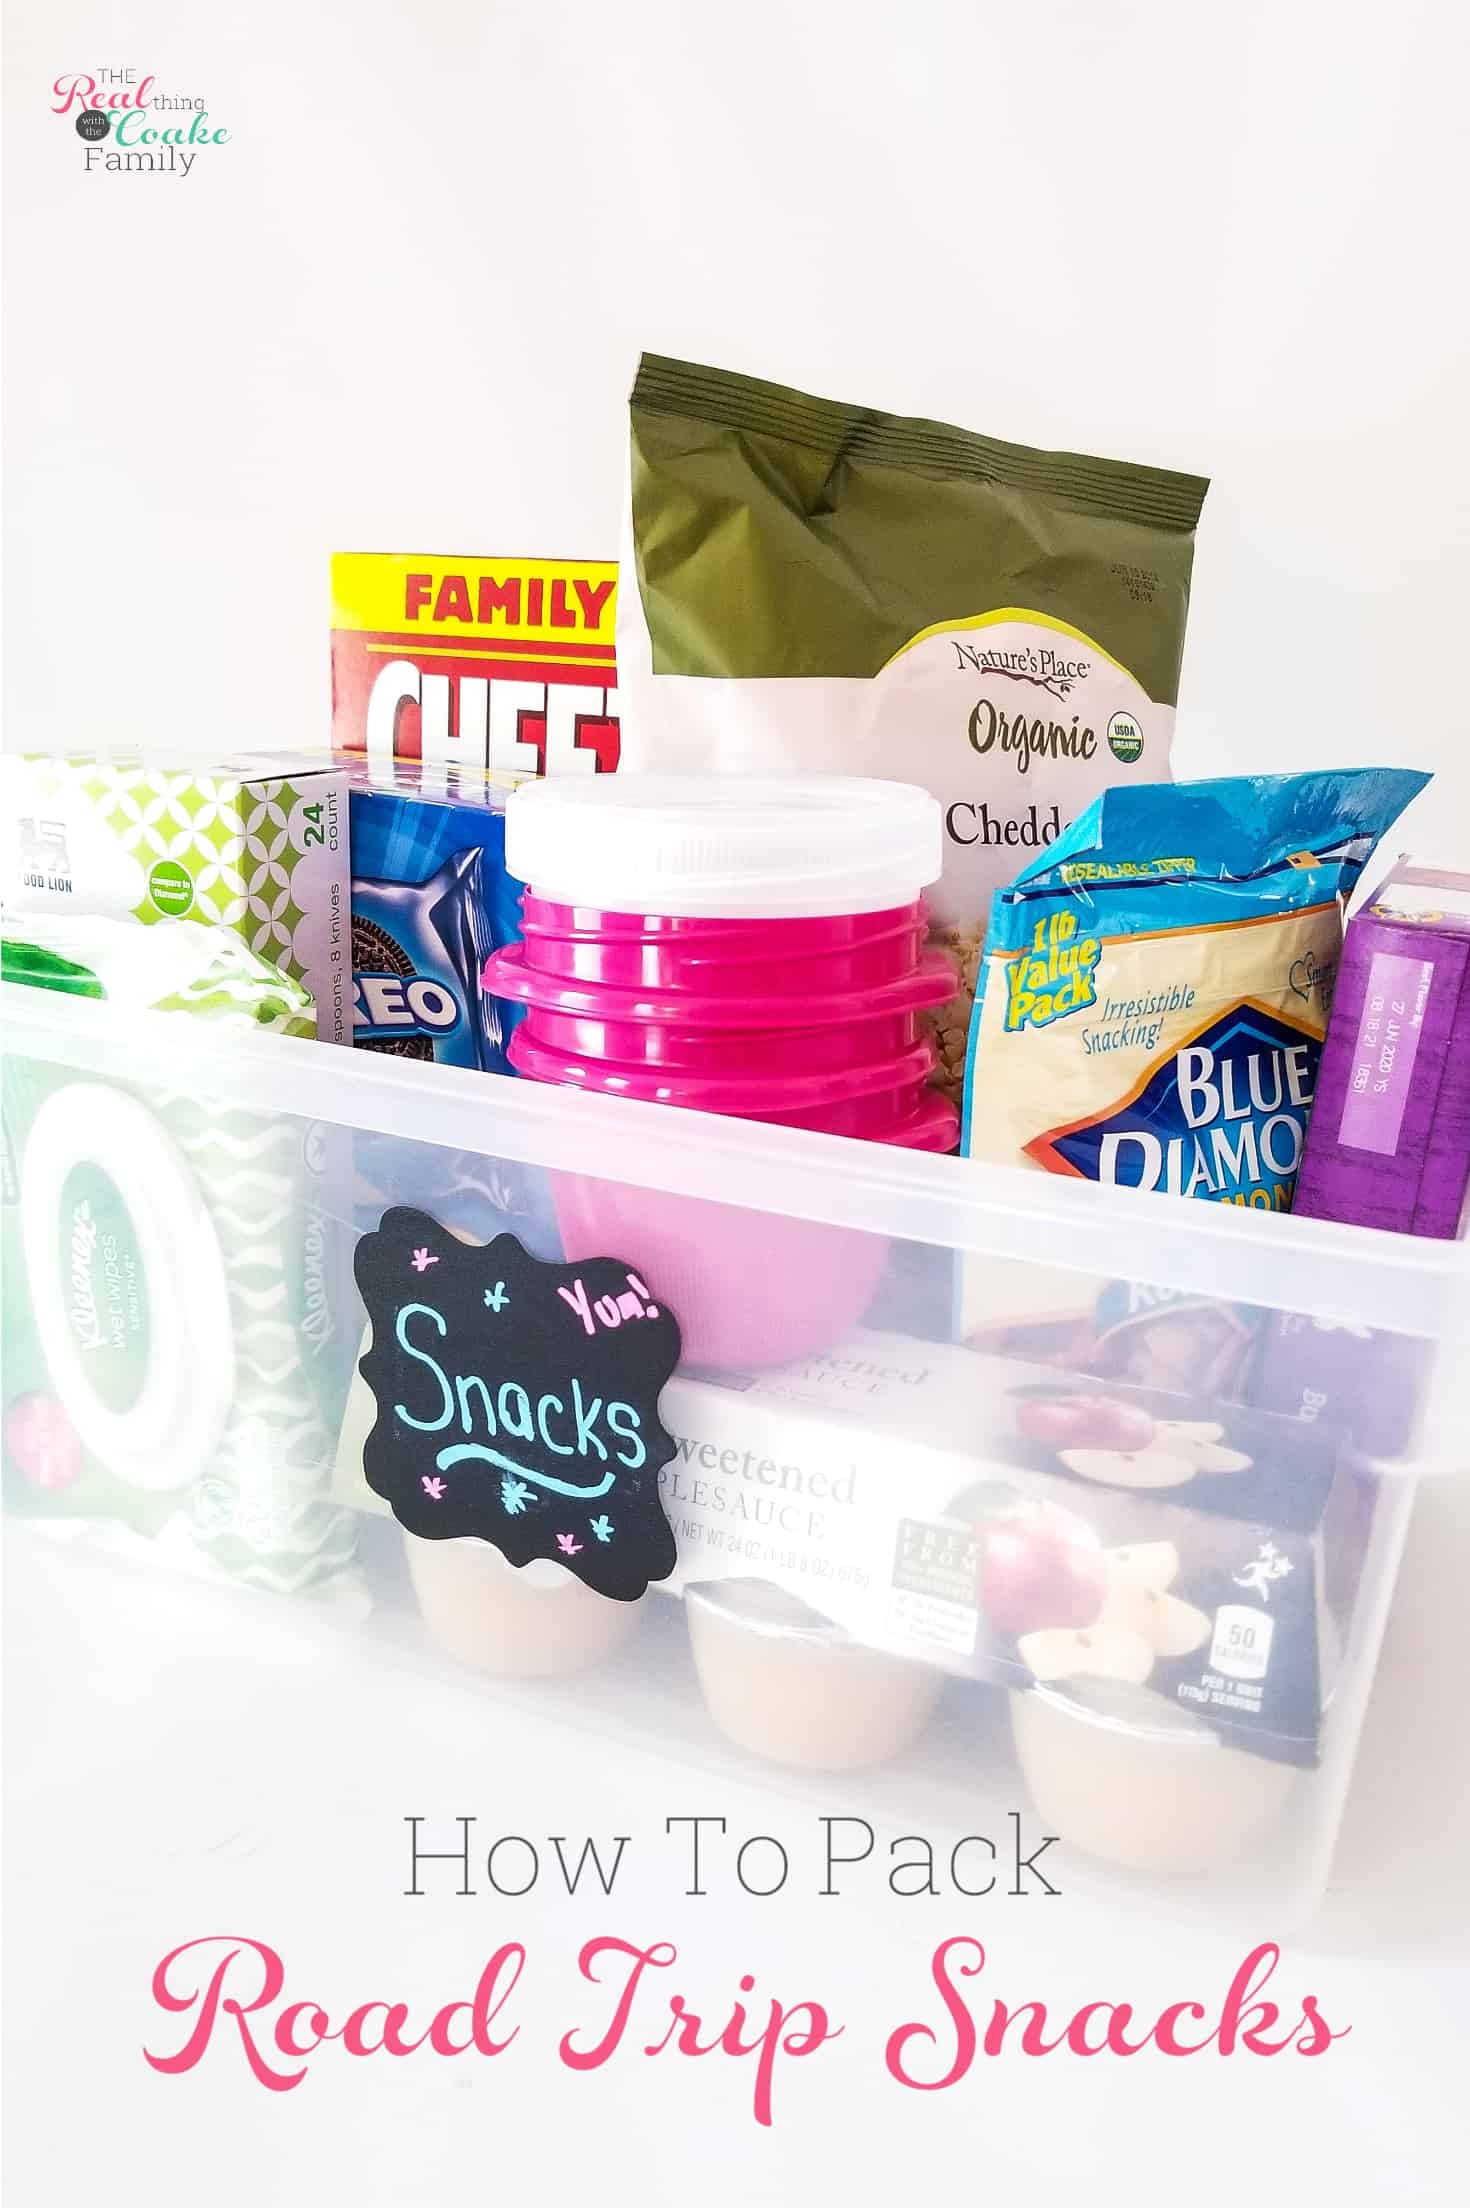 On-the-Go Storage Ideas for Food: DIY Travel Food Kit